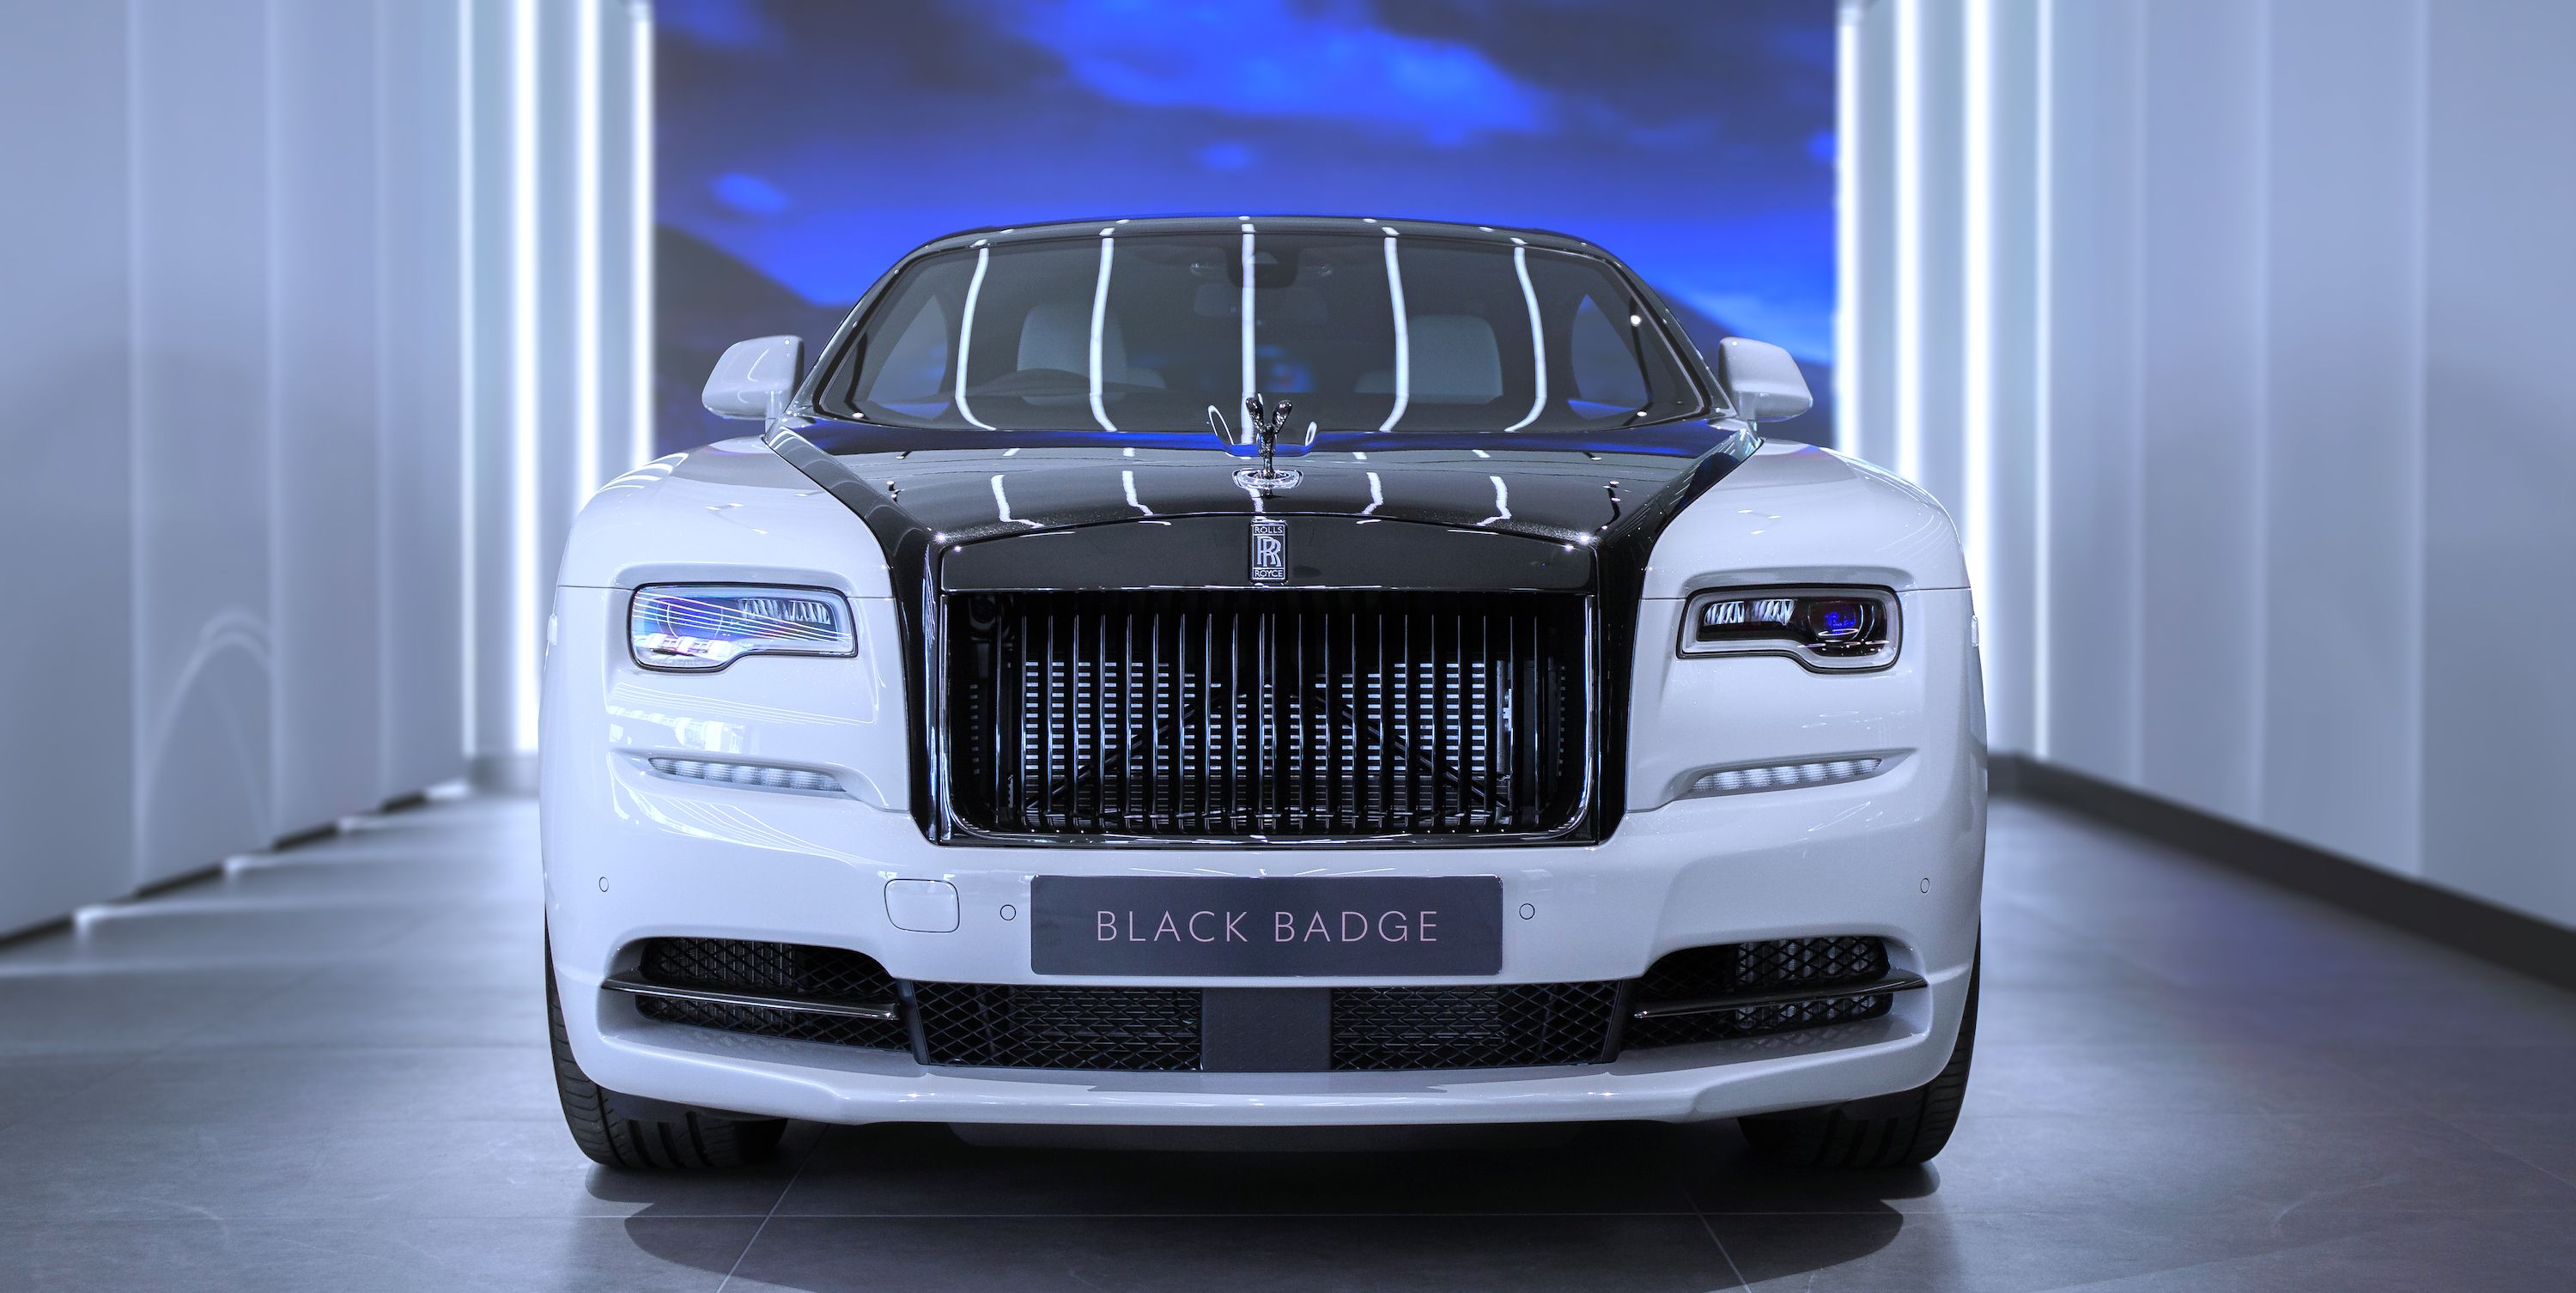 You Can Still Buy a New Rolls-Royce in Russia, Nearly a Year After Sanctions Hit